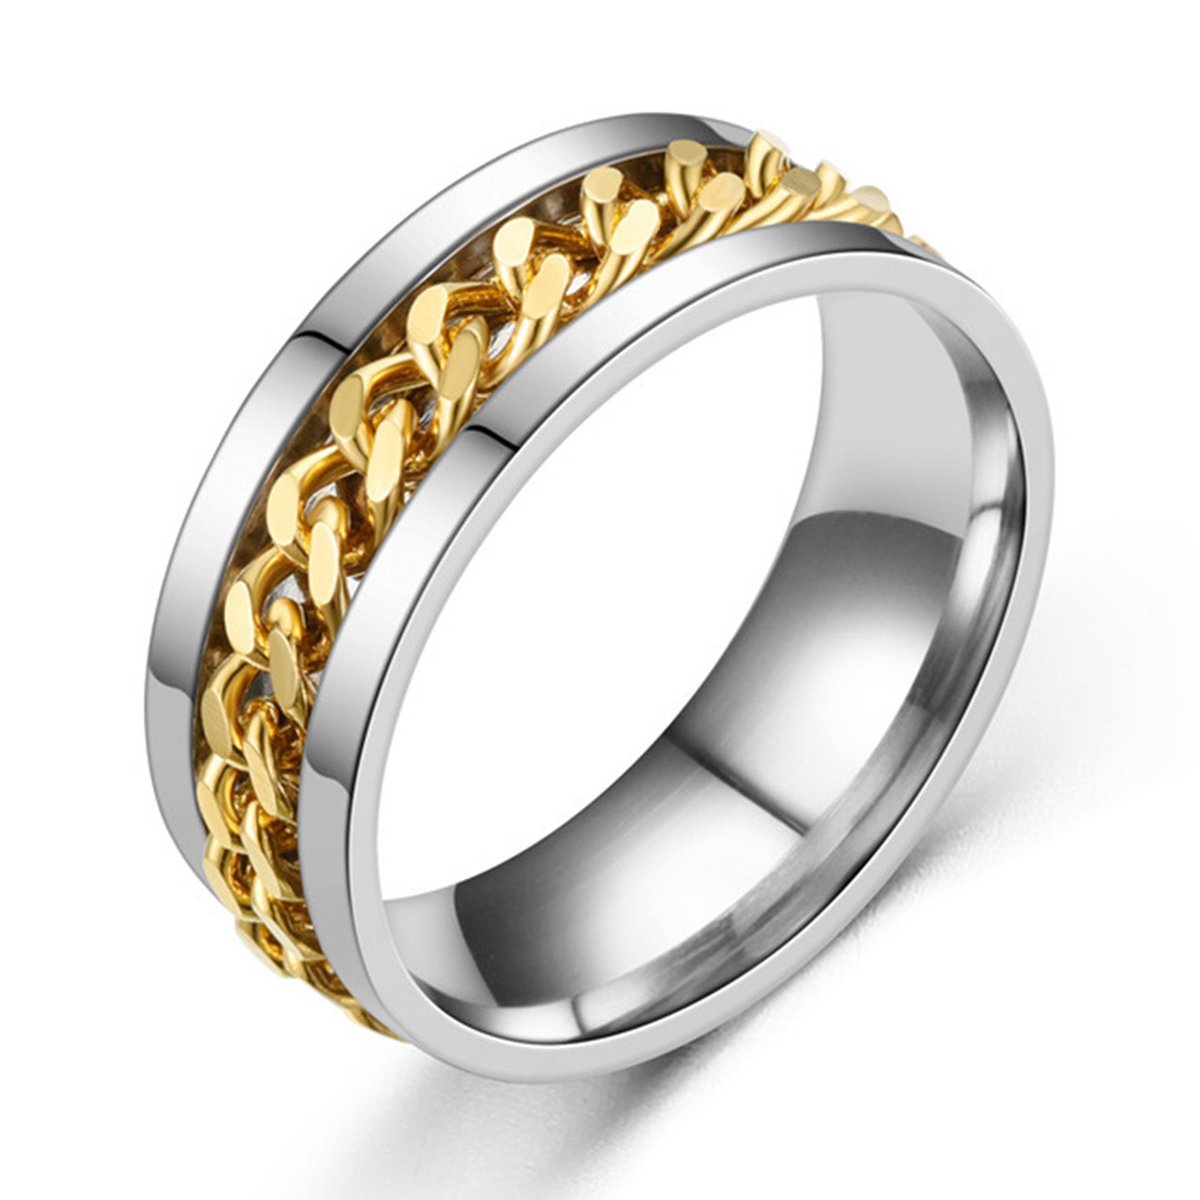 Fidget Ring Zilver - Goud (Maat 70 - 22 mm - 22.3 mm) - Anxiety Ring - Angst Ring - Ring voor mannen - Duimring - Biker Ring - Stress Ring Heren / Dames - Spinning Ring - Draai Ring - Zilver Roestvrij Staal - Spinner Ring